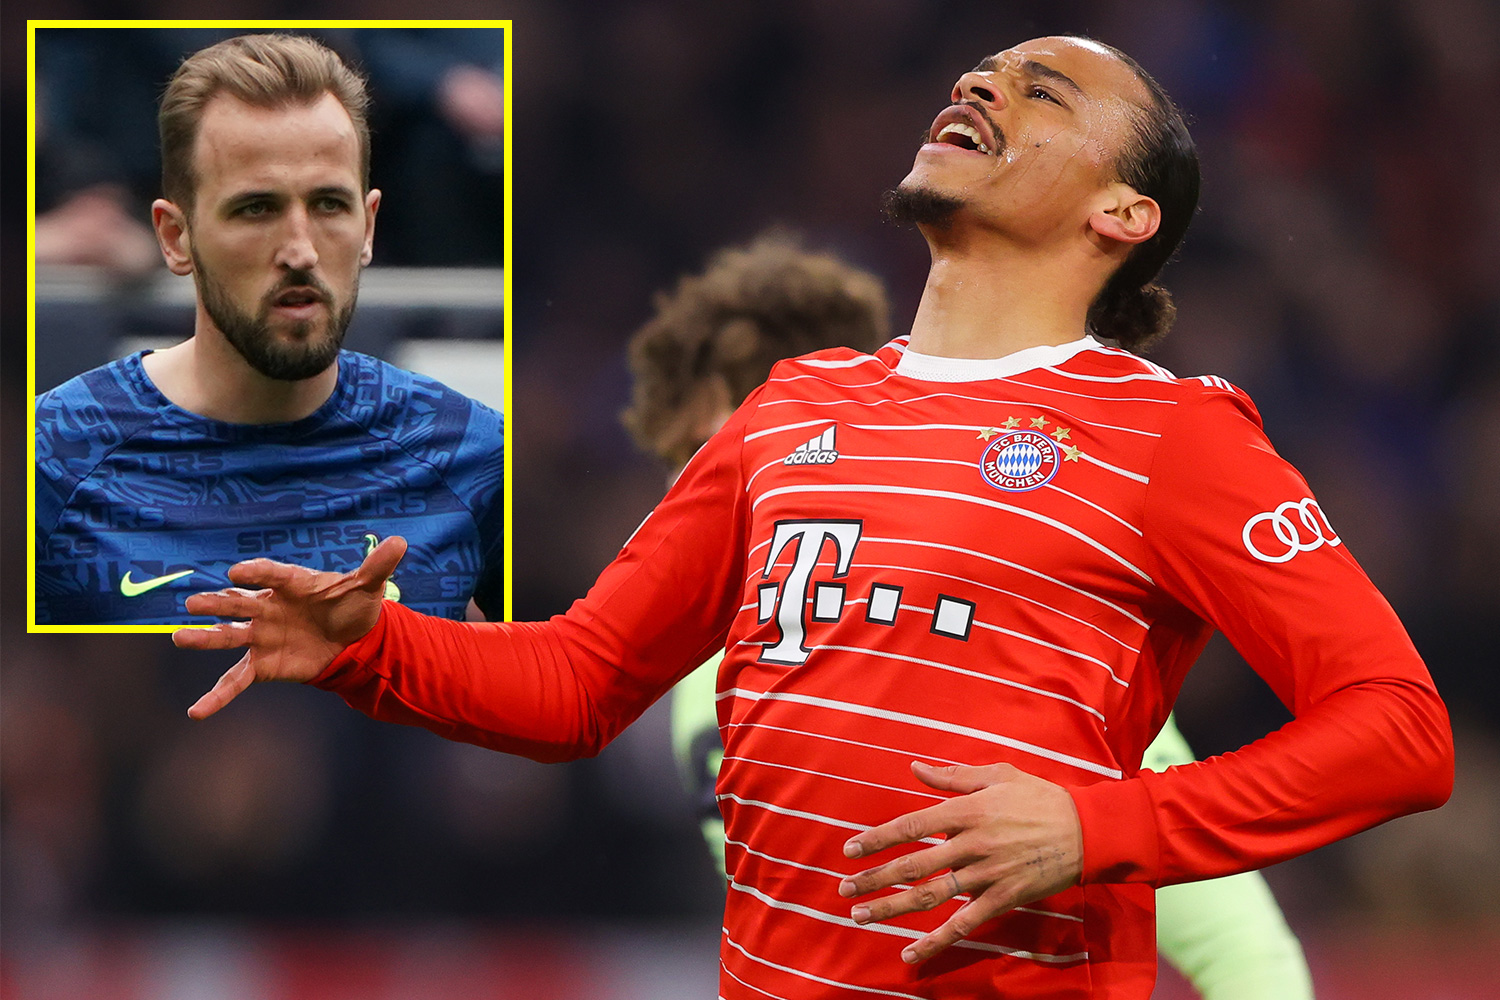 Bayern Munich's wastefulness likened to Chelsea by Stuart Pearce, who says 'Harry Kane would have a field day' against Man City